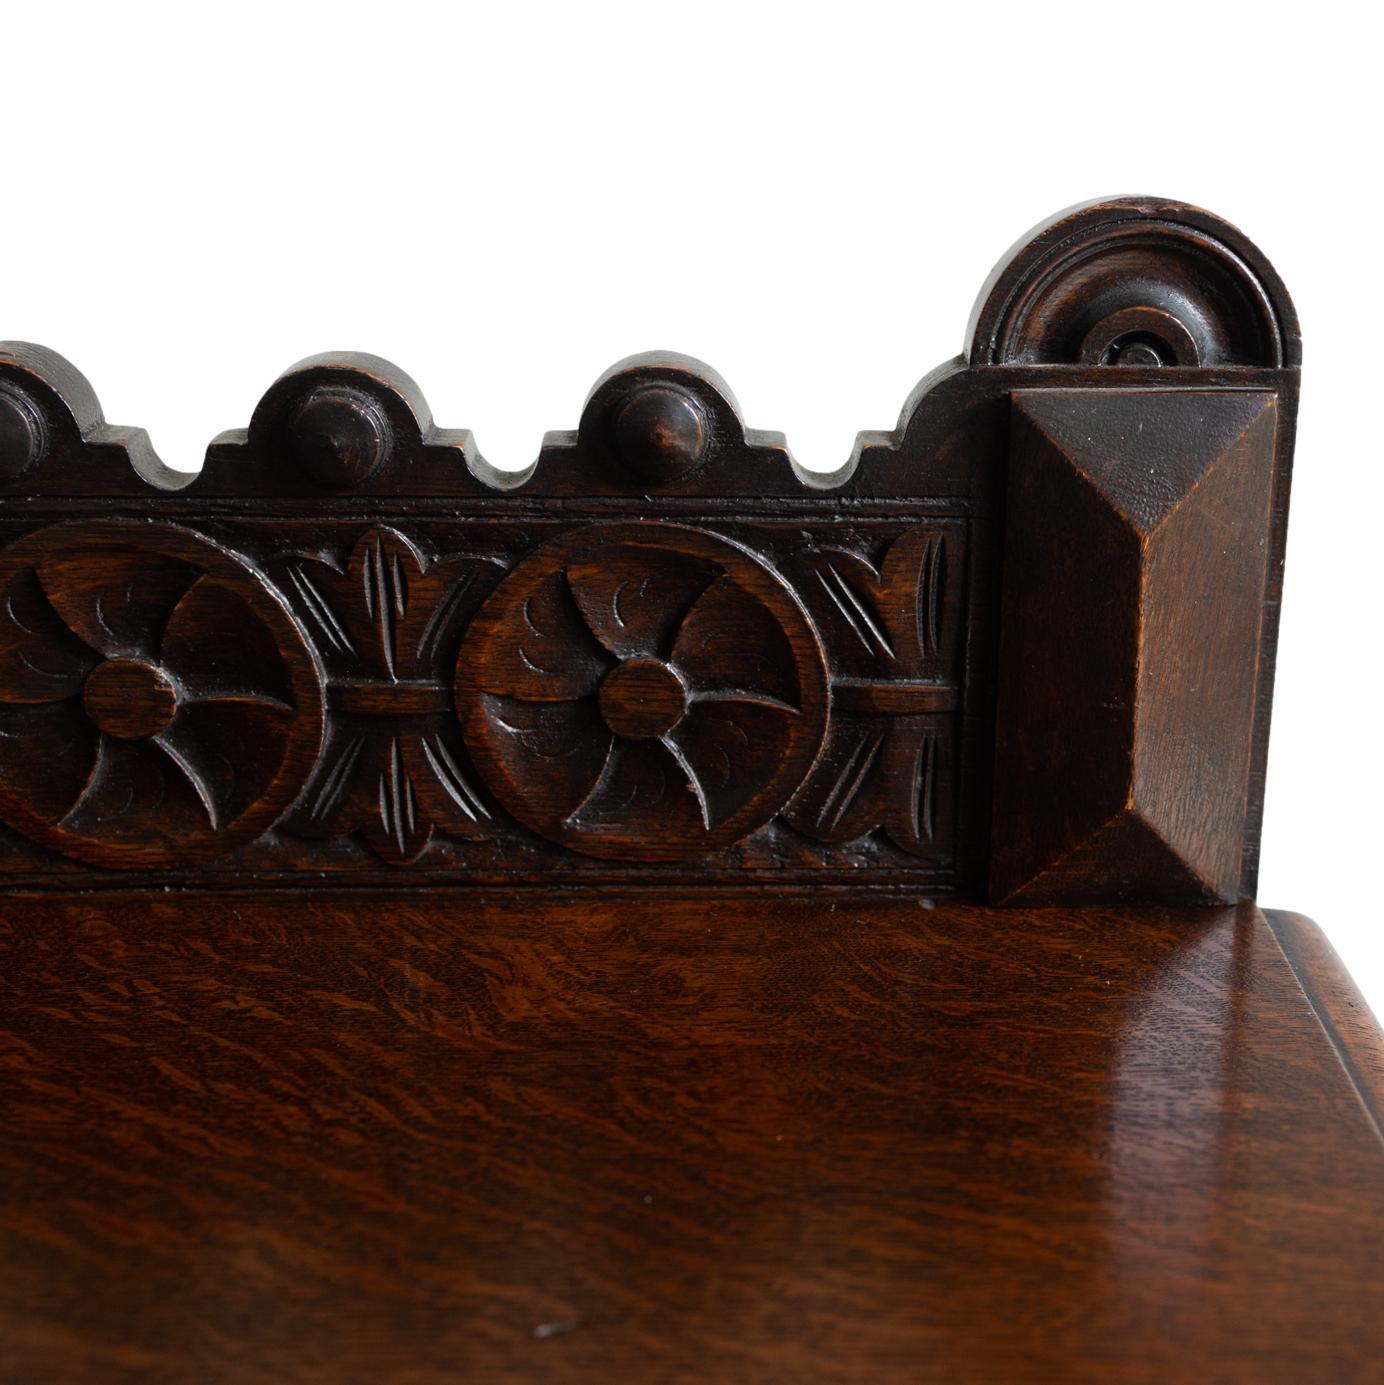 Gothic Revival A Gothic Hand-Carved Oak Console Table, Hidden Frieze Drawer, English, ca. 1870